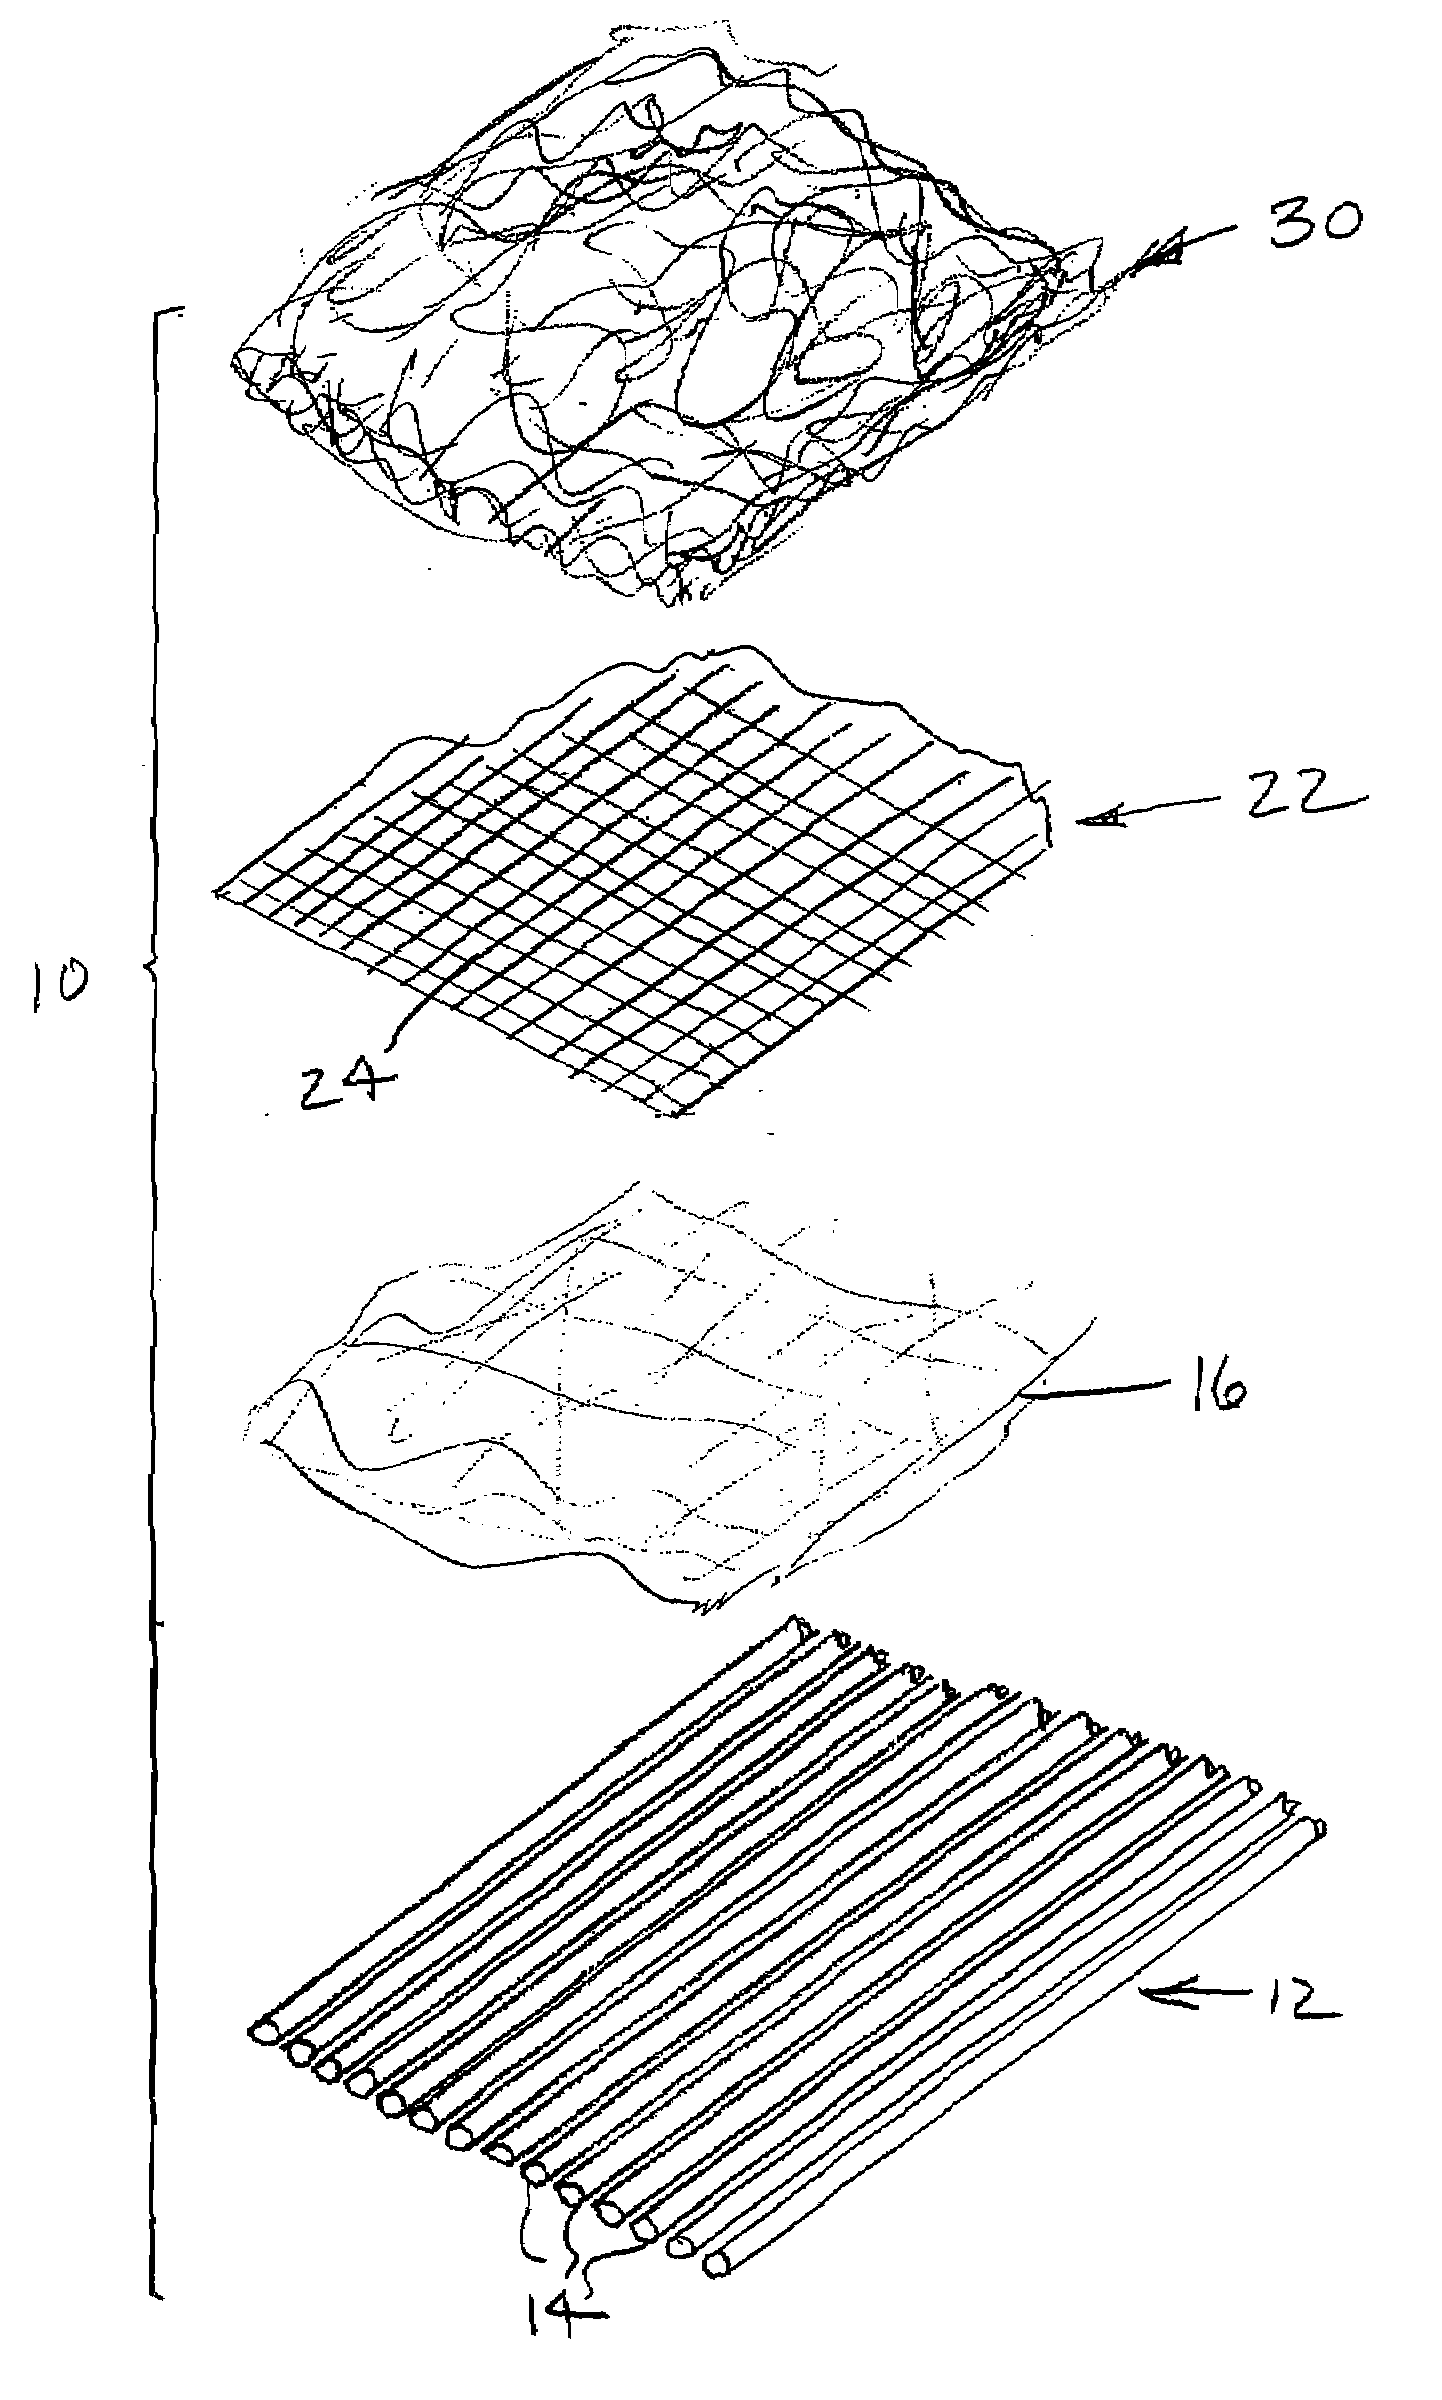 Nonwoven textile assembly, method of manufacture, and spirally wound press felt comprised of same